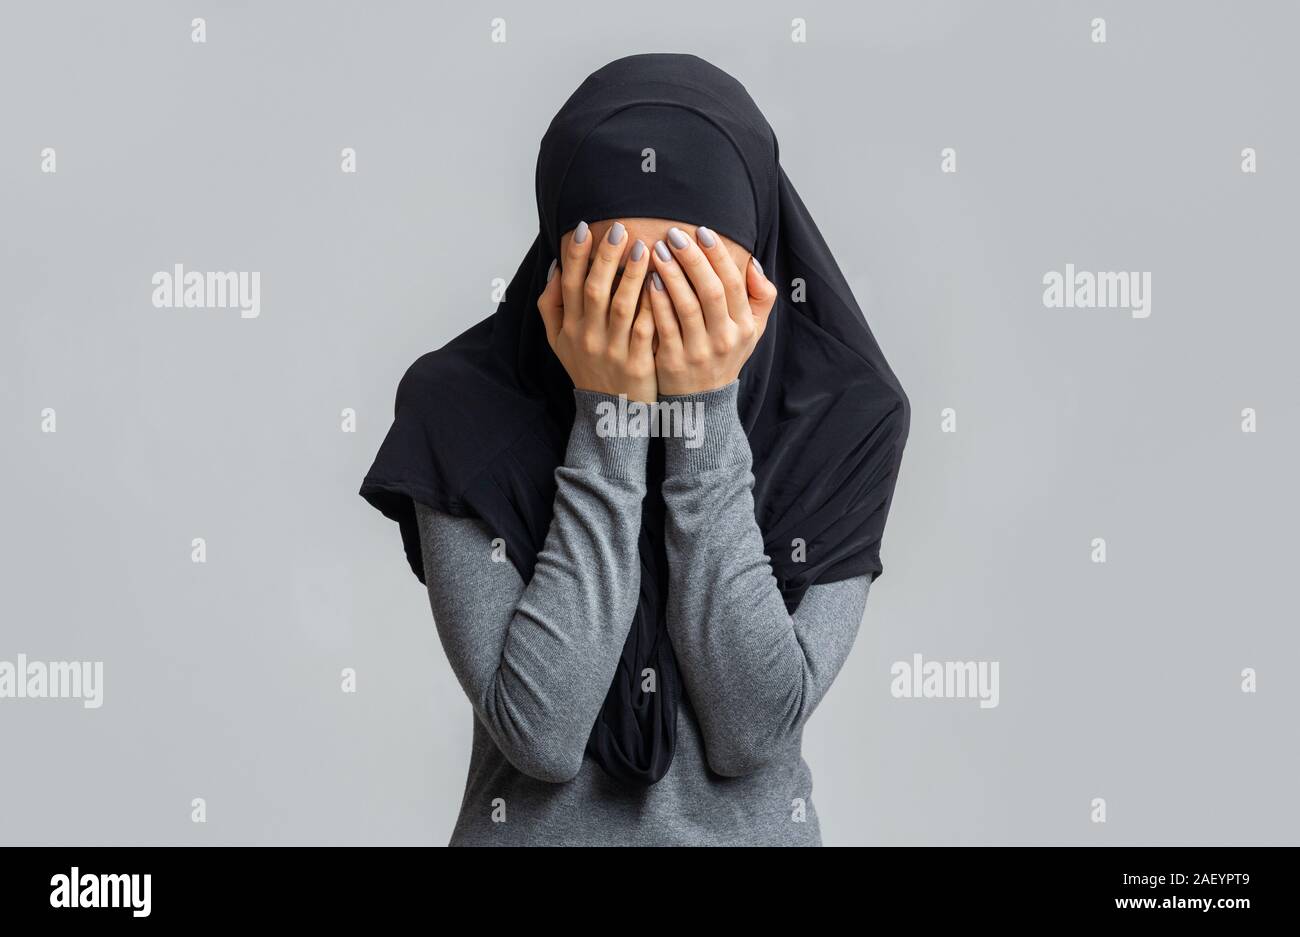 Islamophobia and muslim women discrimination concept. Woman in black hijab covering face with hands, posing over gray studio background Stock Photo